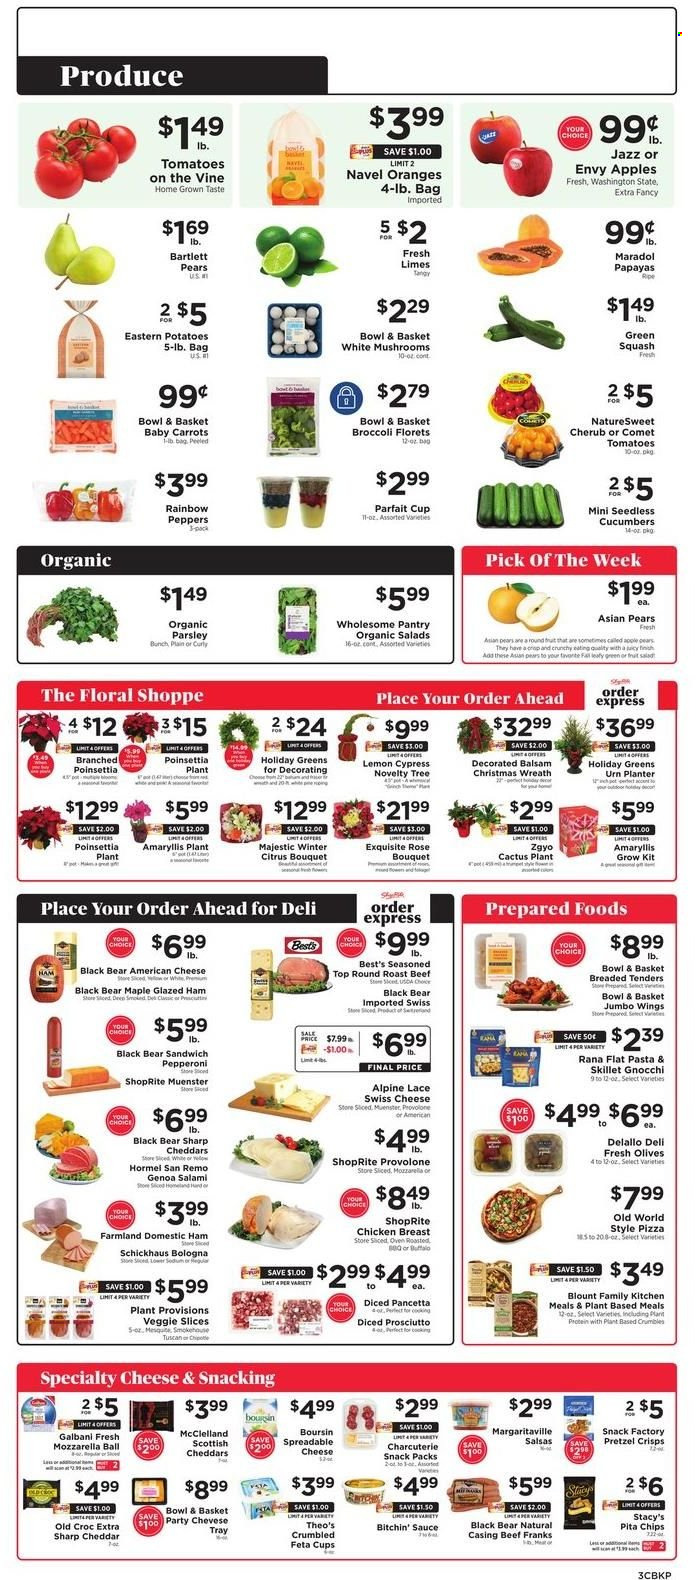 thumbnail - ShopRite Flyer - 11/27/2022 - 12/03/2022 - Sales products - Bowl & Basket, broccoli, carrots, cucumber, zucchini, potatoes, parsley, salad, peppers, apples, Bartlett pears, limes, pears, oranges, gnocchi, pizza, sandwich, pasta, sauce, Rana, Hormel, salami, ham, prosciutto, pancetta, bologna sausage, pepperoni, american cheese, swiss cheese, Münster cheese, feta, Galbani, Provolone, snack, chips, pretzel crisps, pita chips, plant protein, olives, fruit salad, rosé wine, beef meat, round roast, roast beef, tray, cup, paper, poinsettia, cactus, bouquet, rose, navel oranges. Page 3.